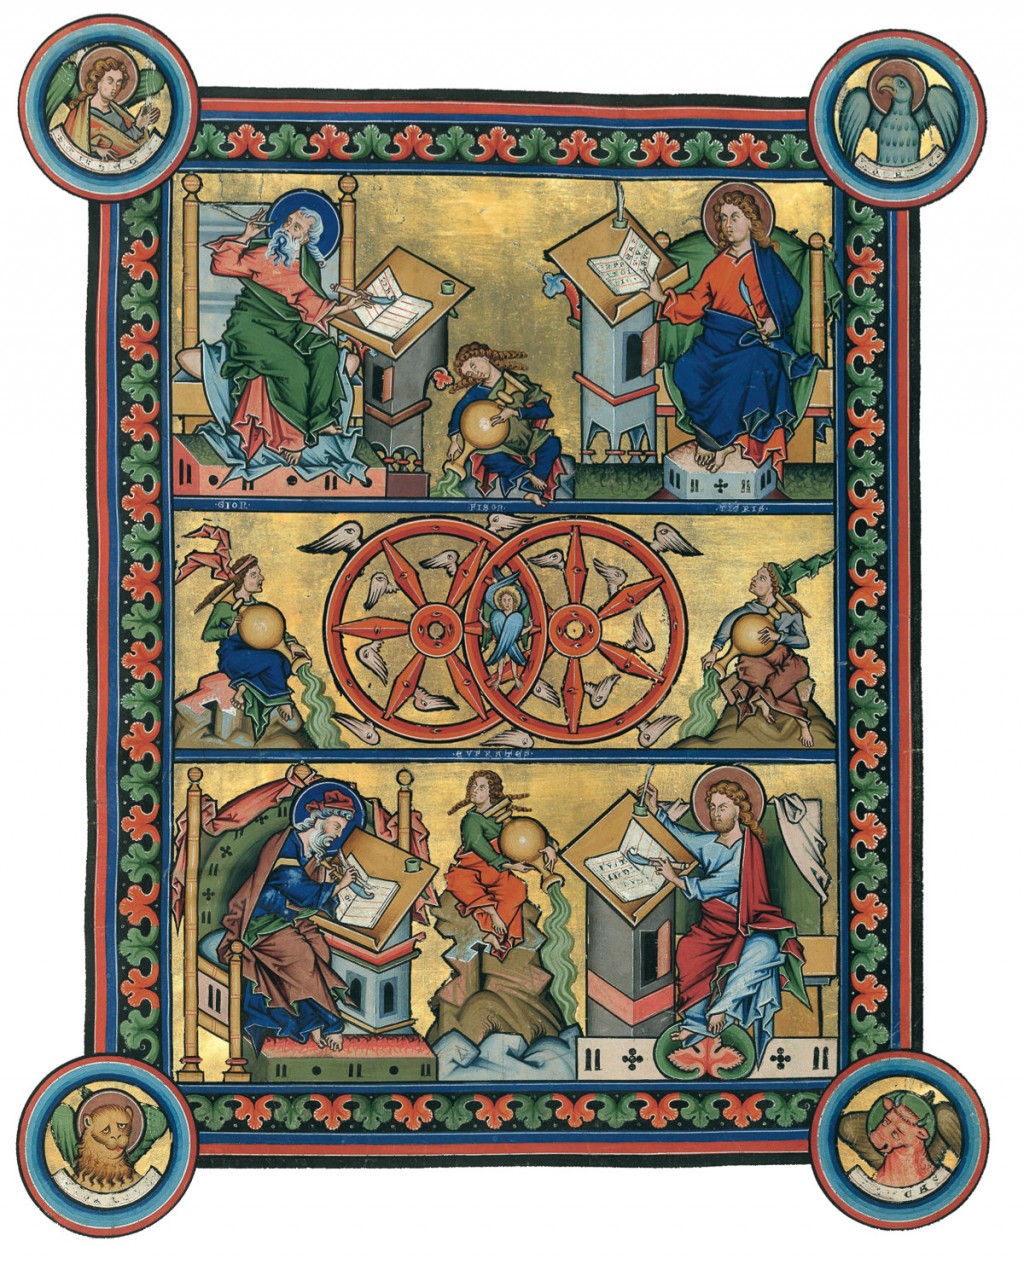 Illuminated page from the Mainz Gospels